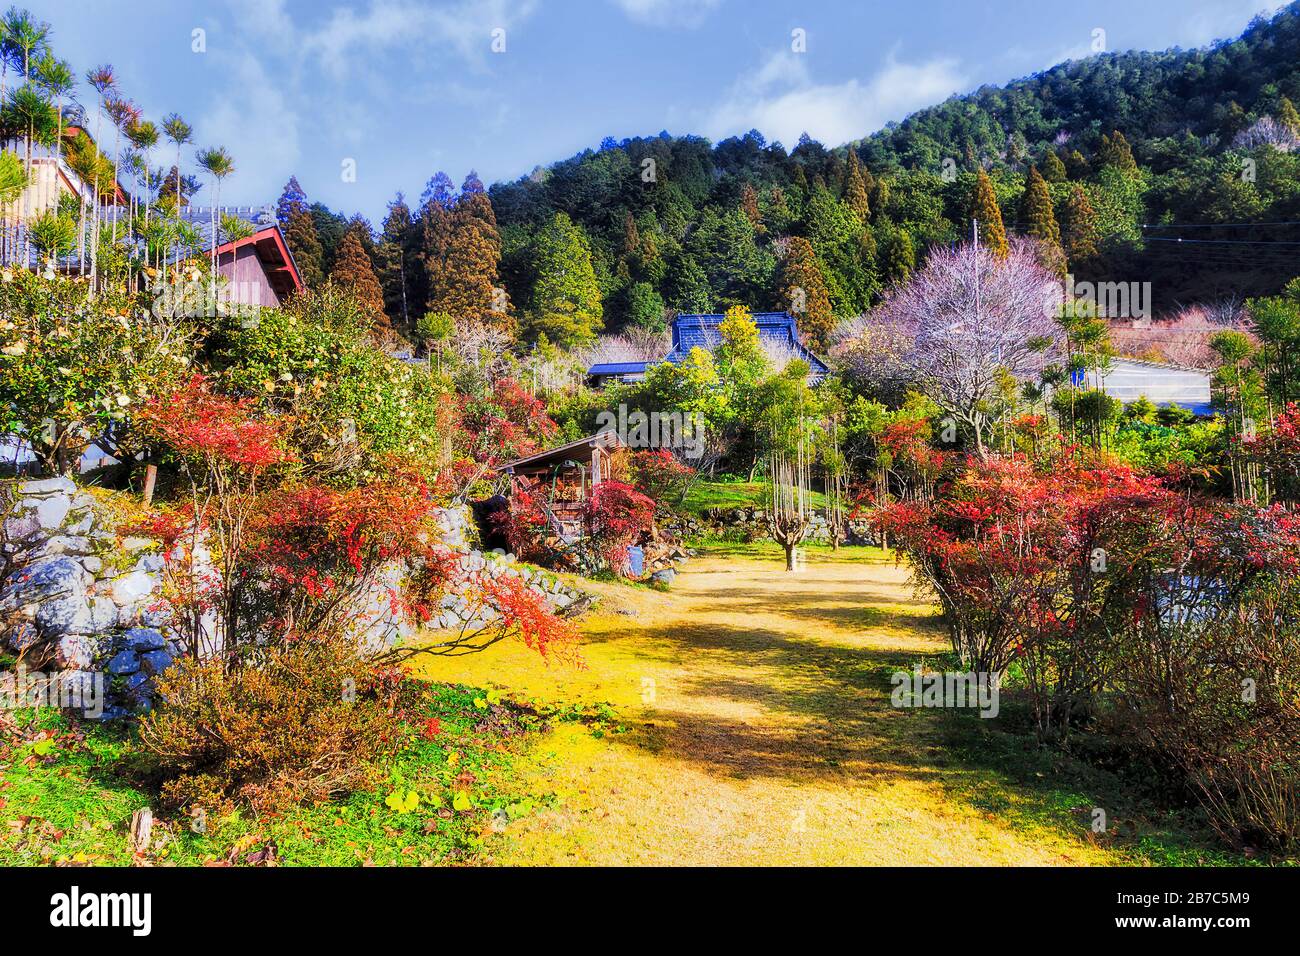 Colouful landscape of local farm houses with gardens and back yards in bright sun light - remote agriculture village Ohara in Japan. Stock Photo